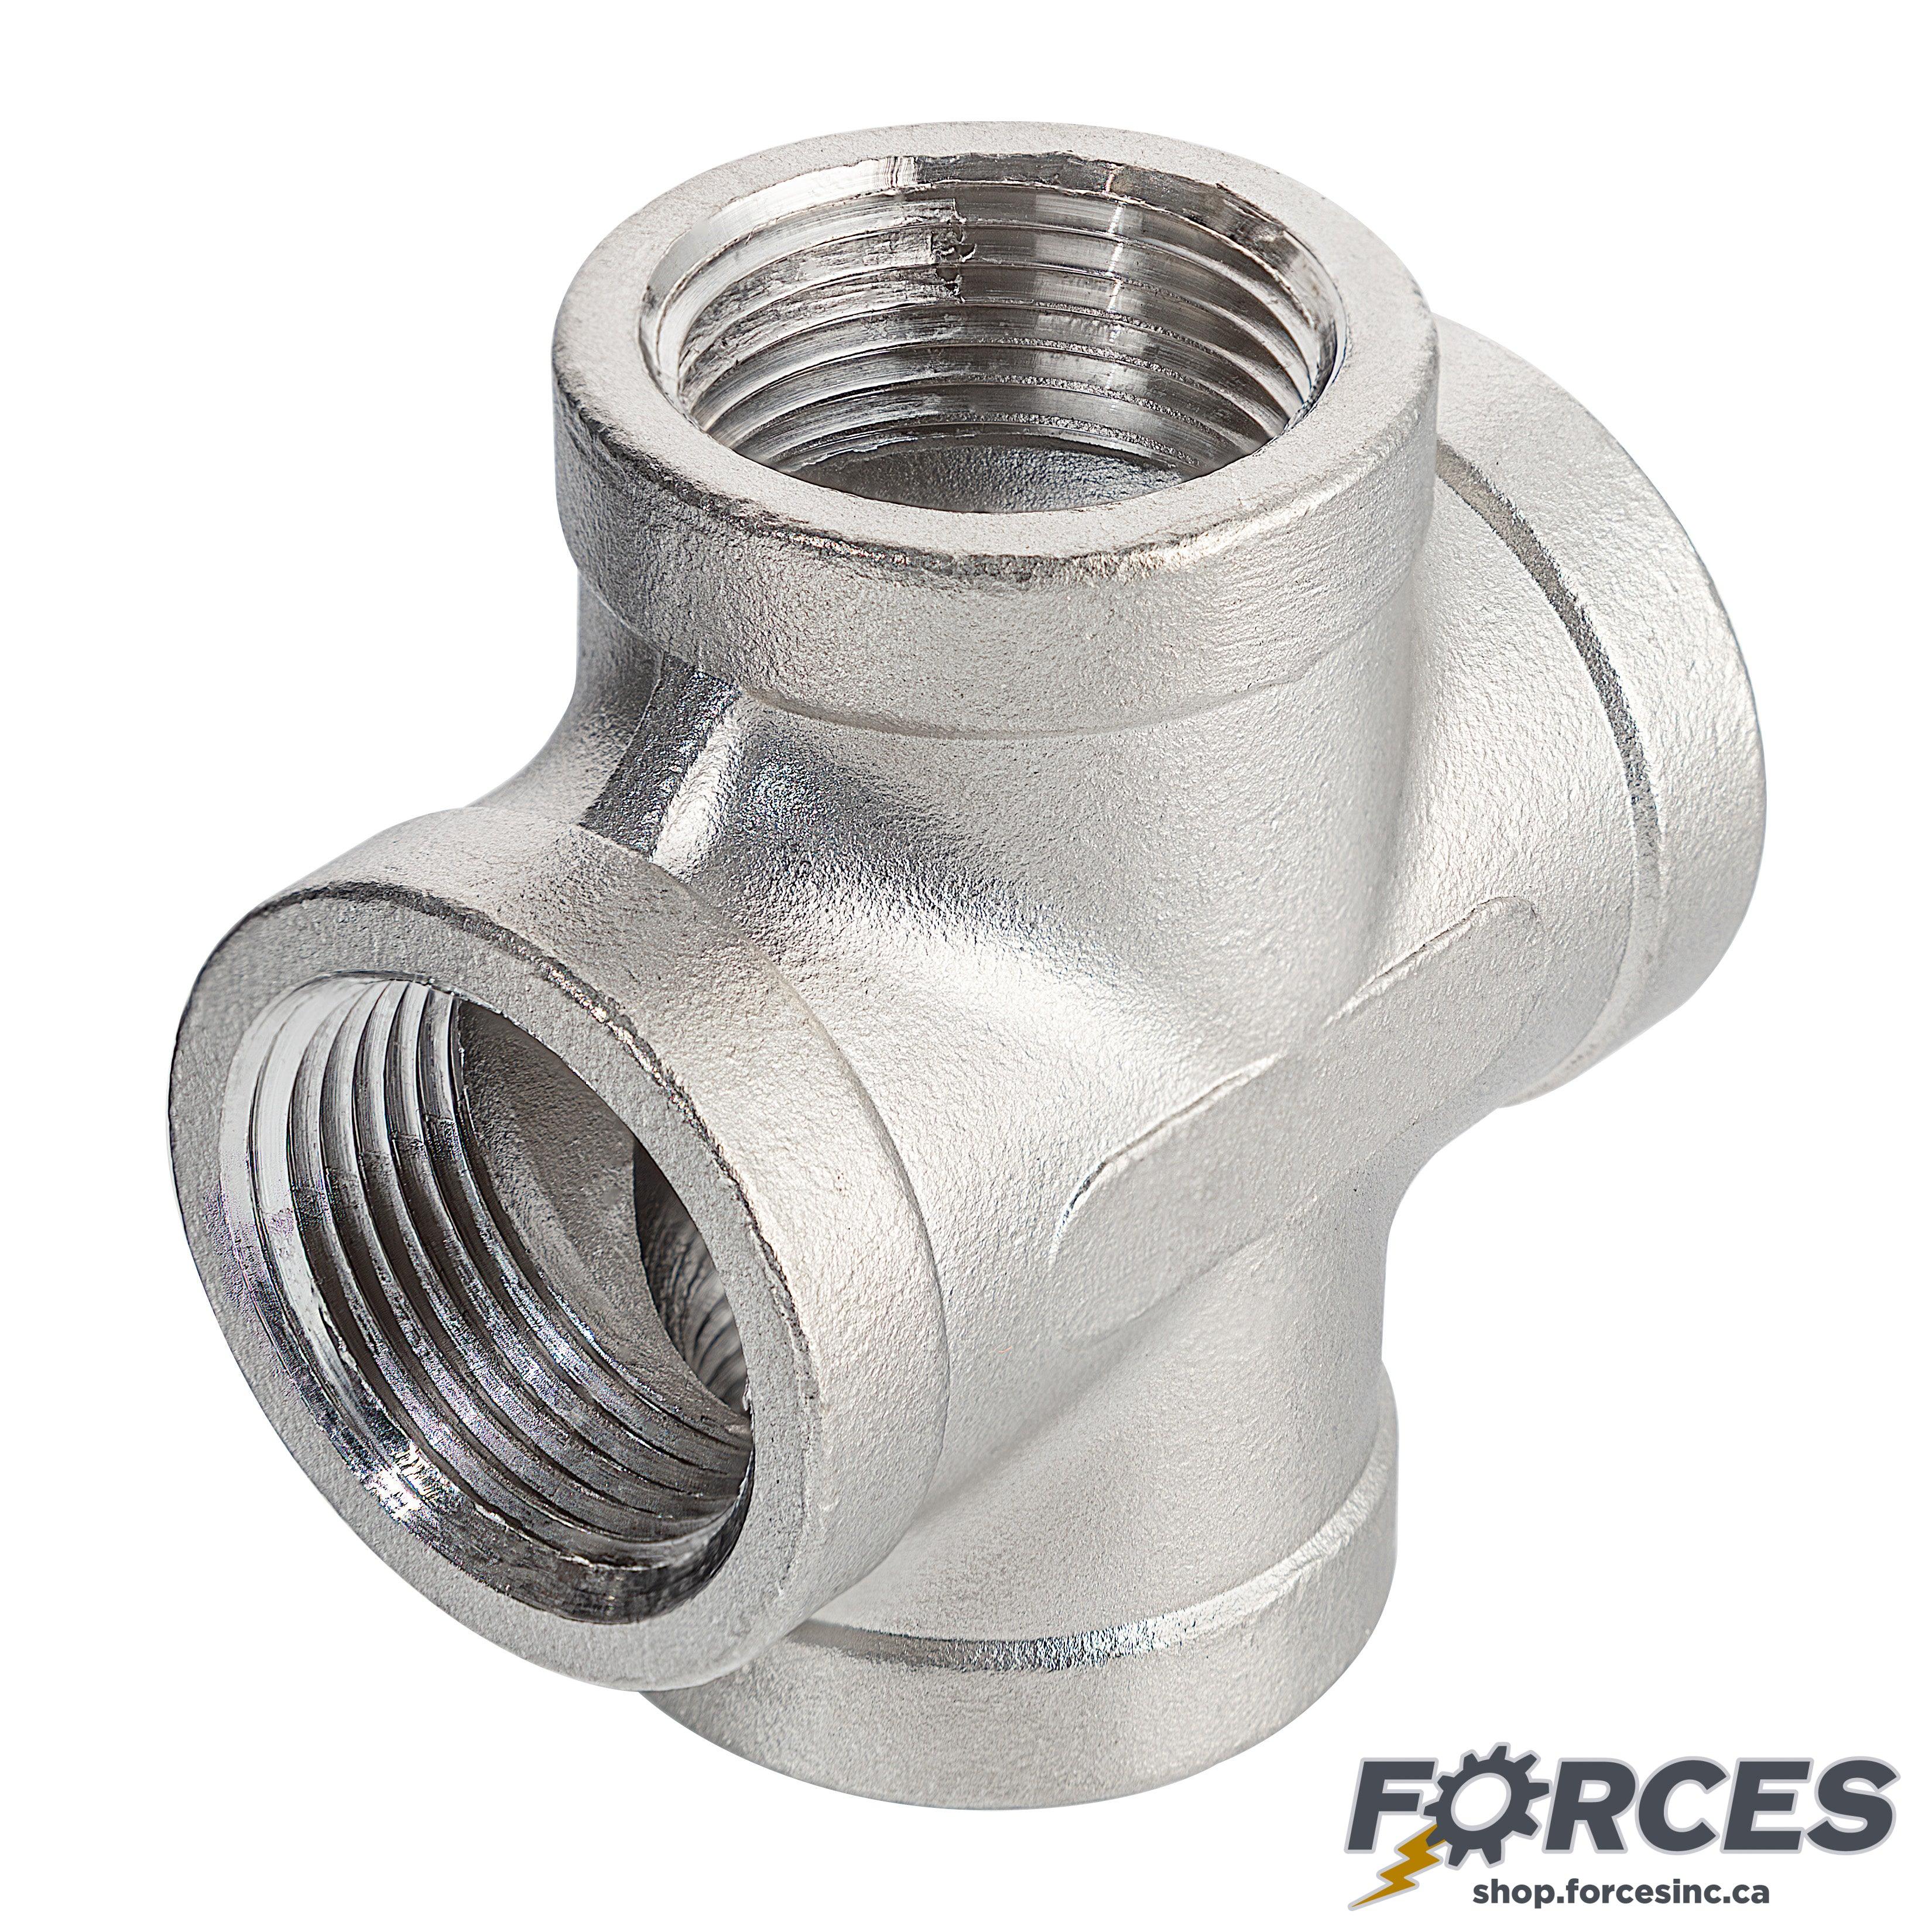 1/2" Cross NPT #150 - Stainless Steel 316 - Forces Inc